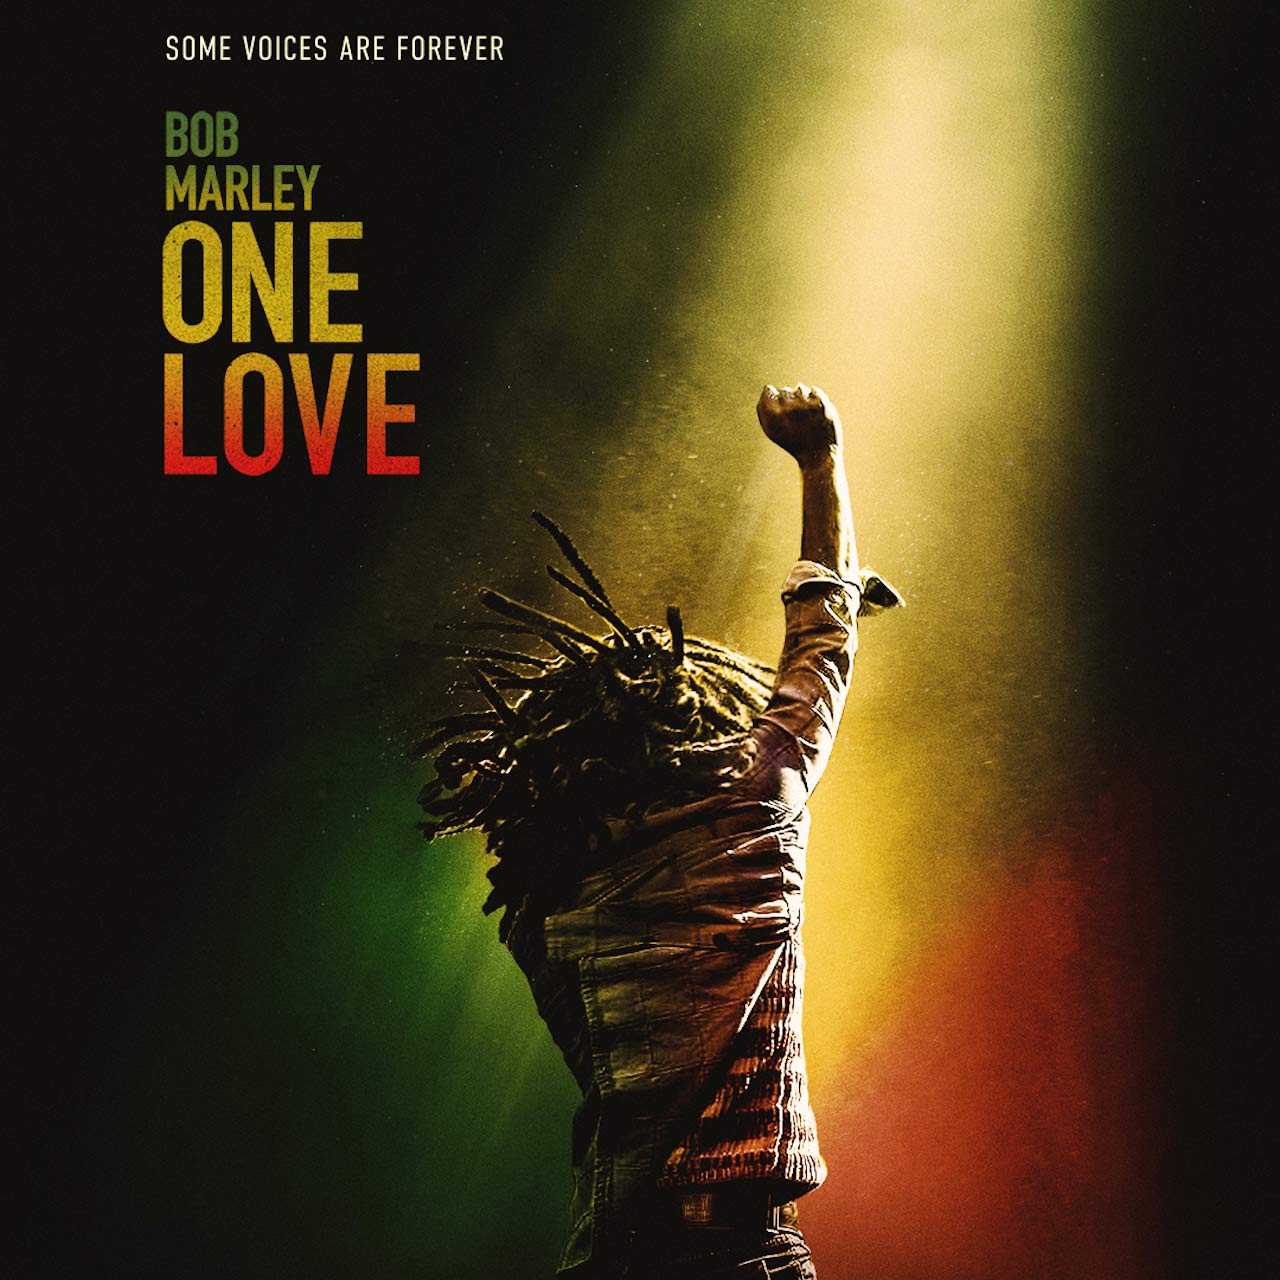 Forthcoming Biopic ‘Bob Marley: One Love’ Trailer Revealed